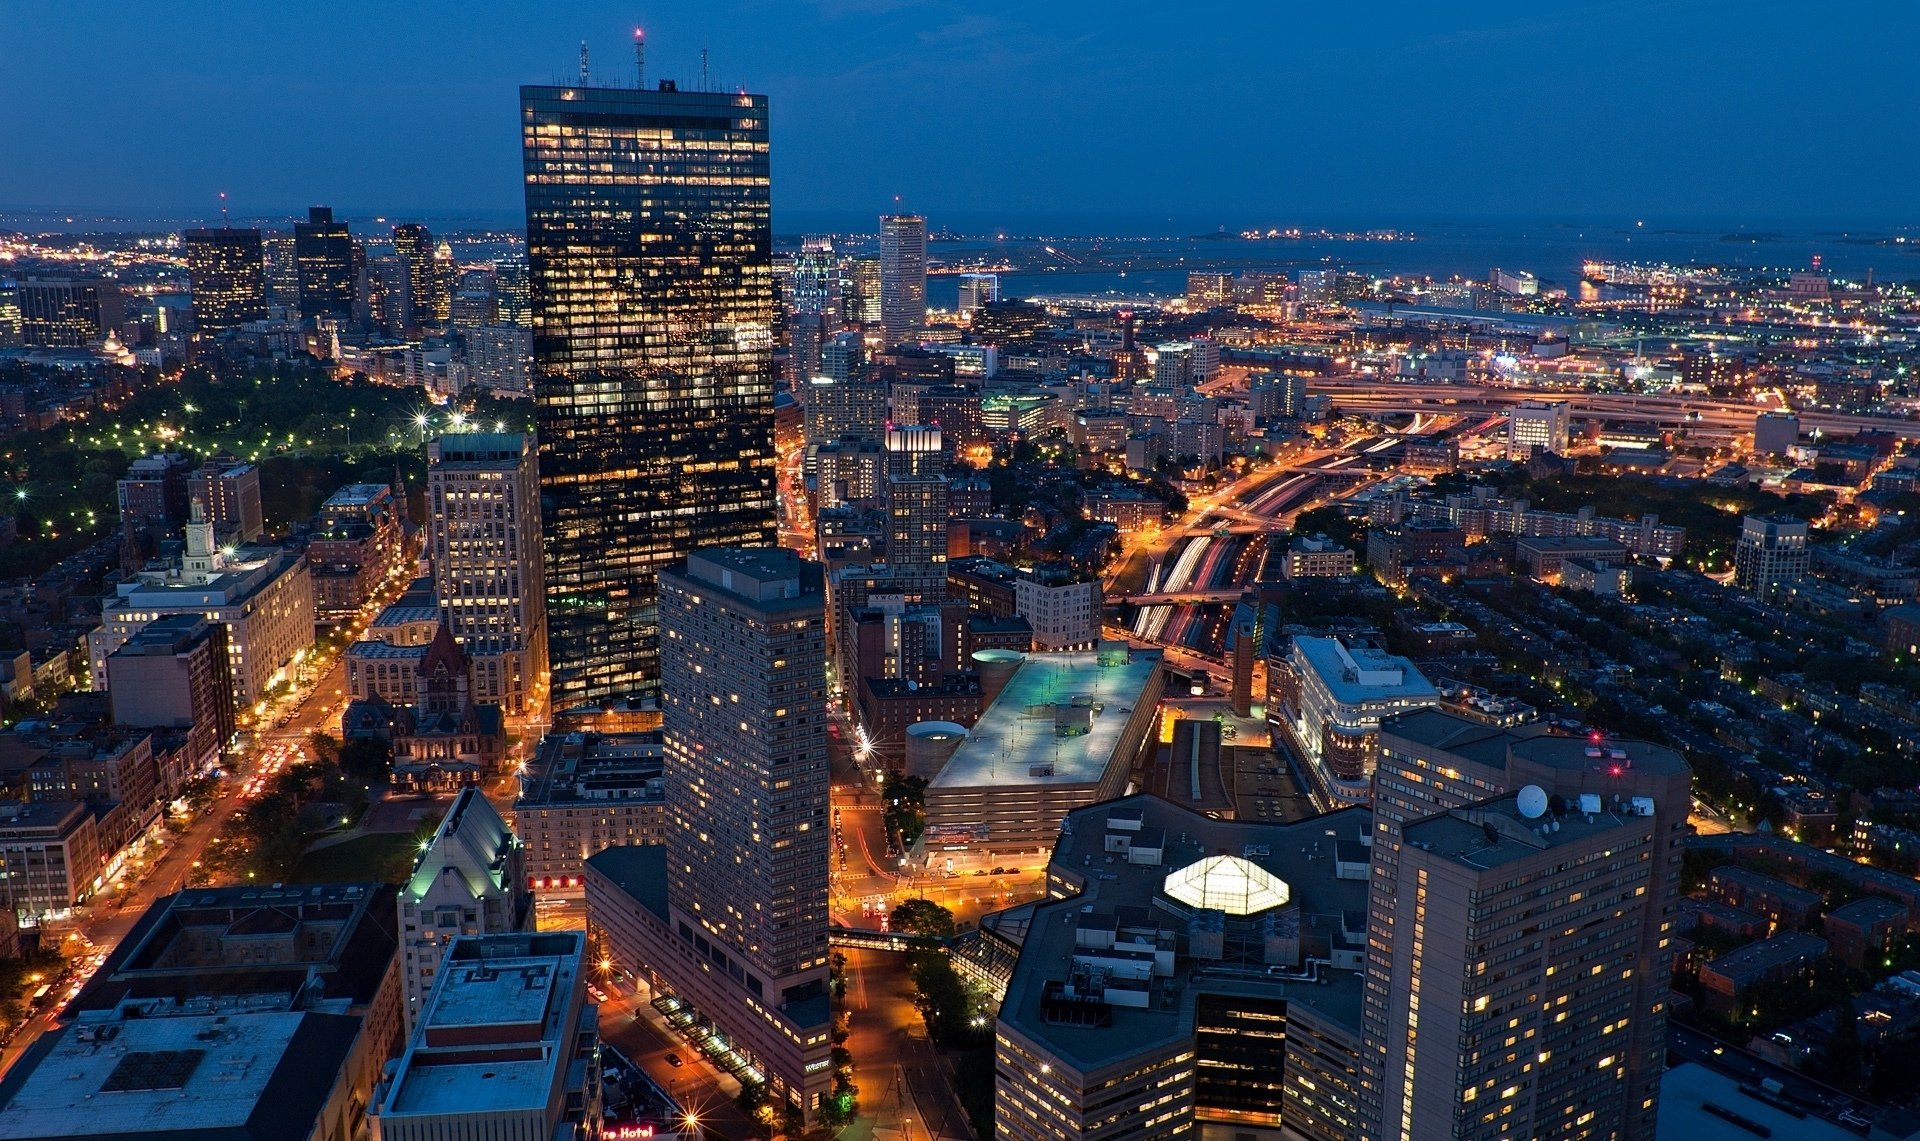 Great Pictures Of Boston - HD Wallpaper 